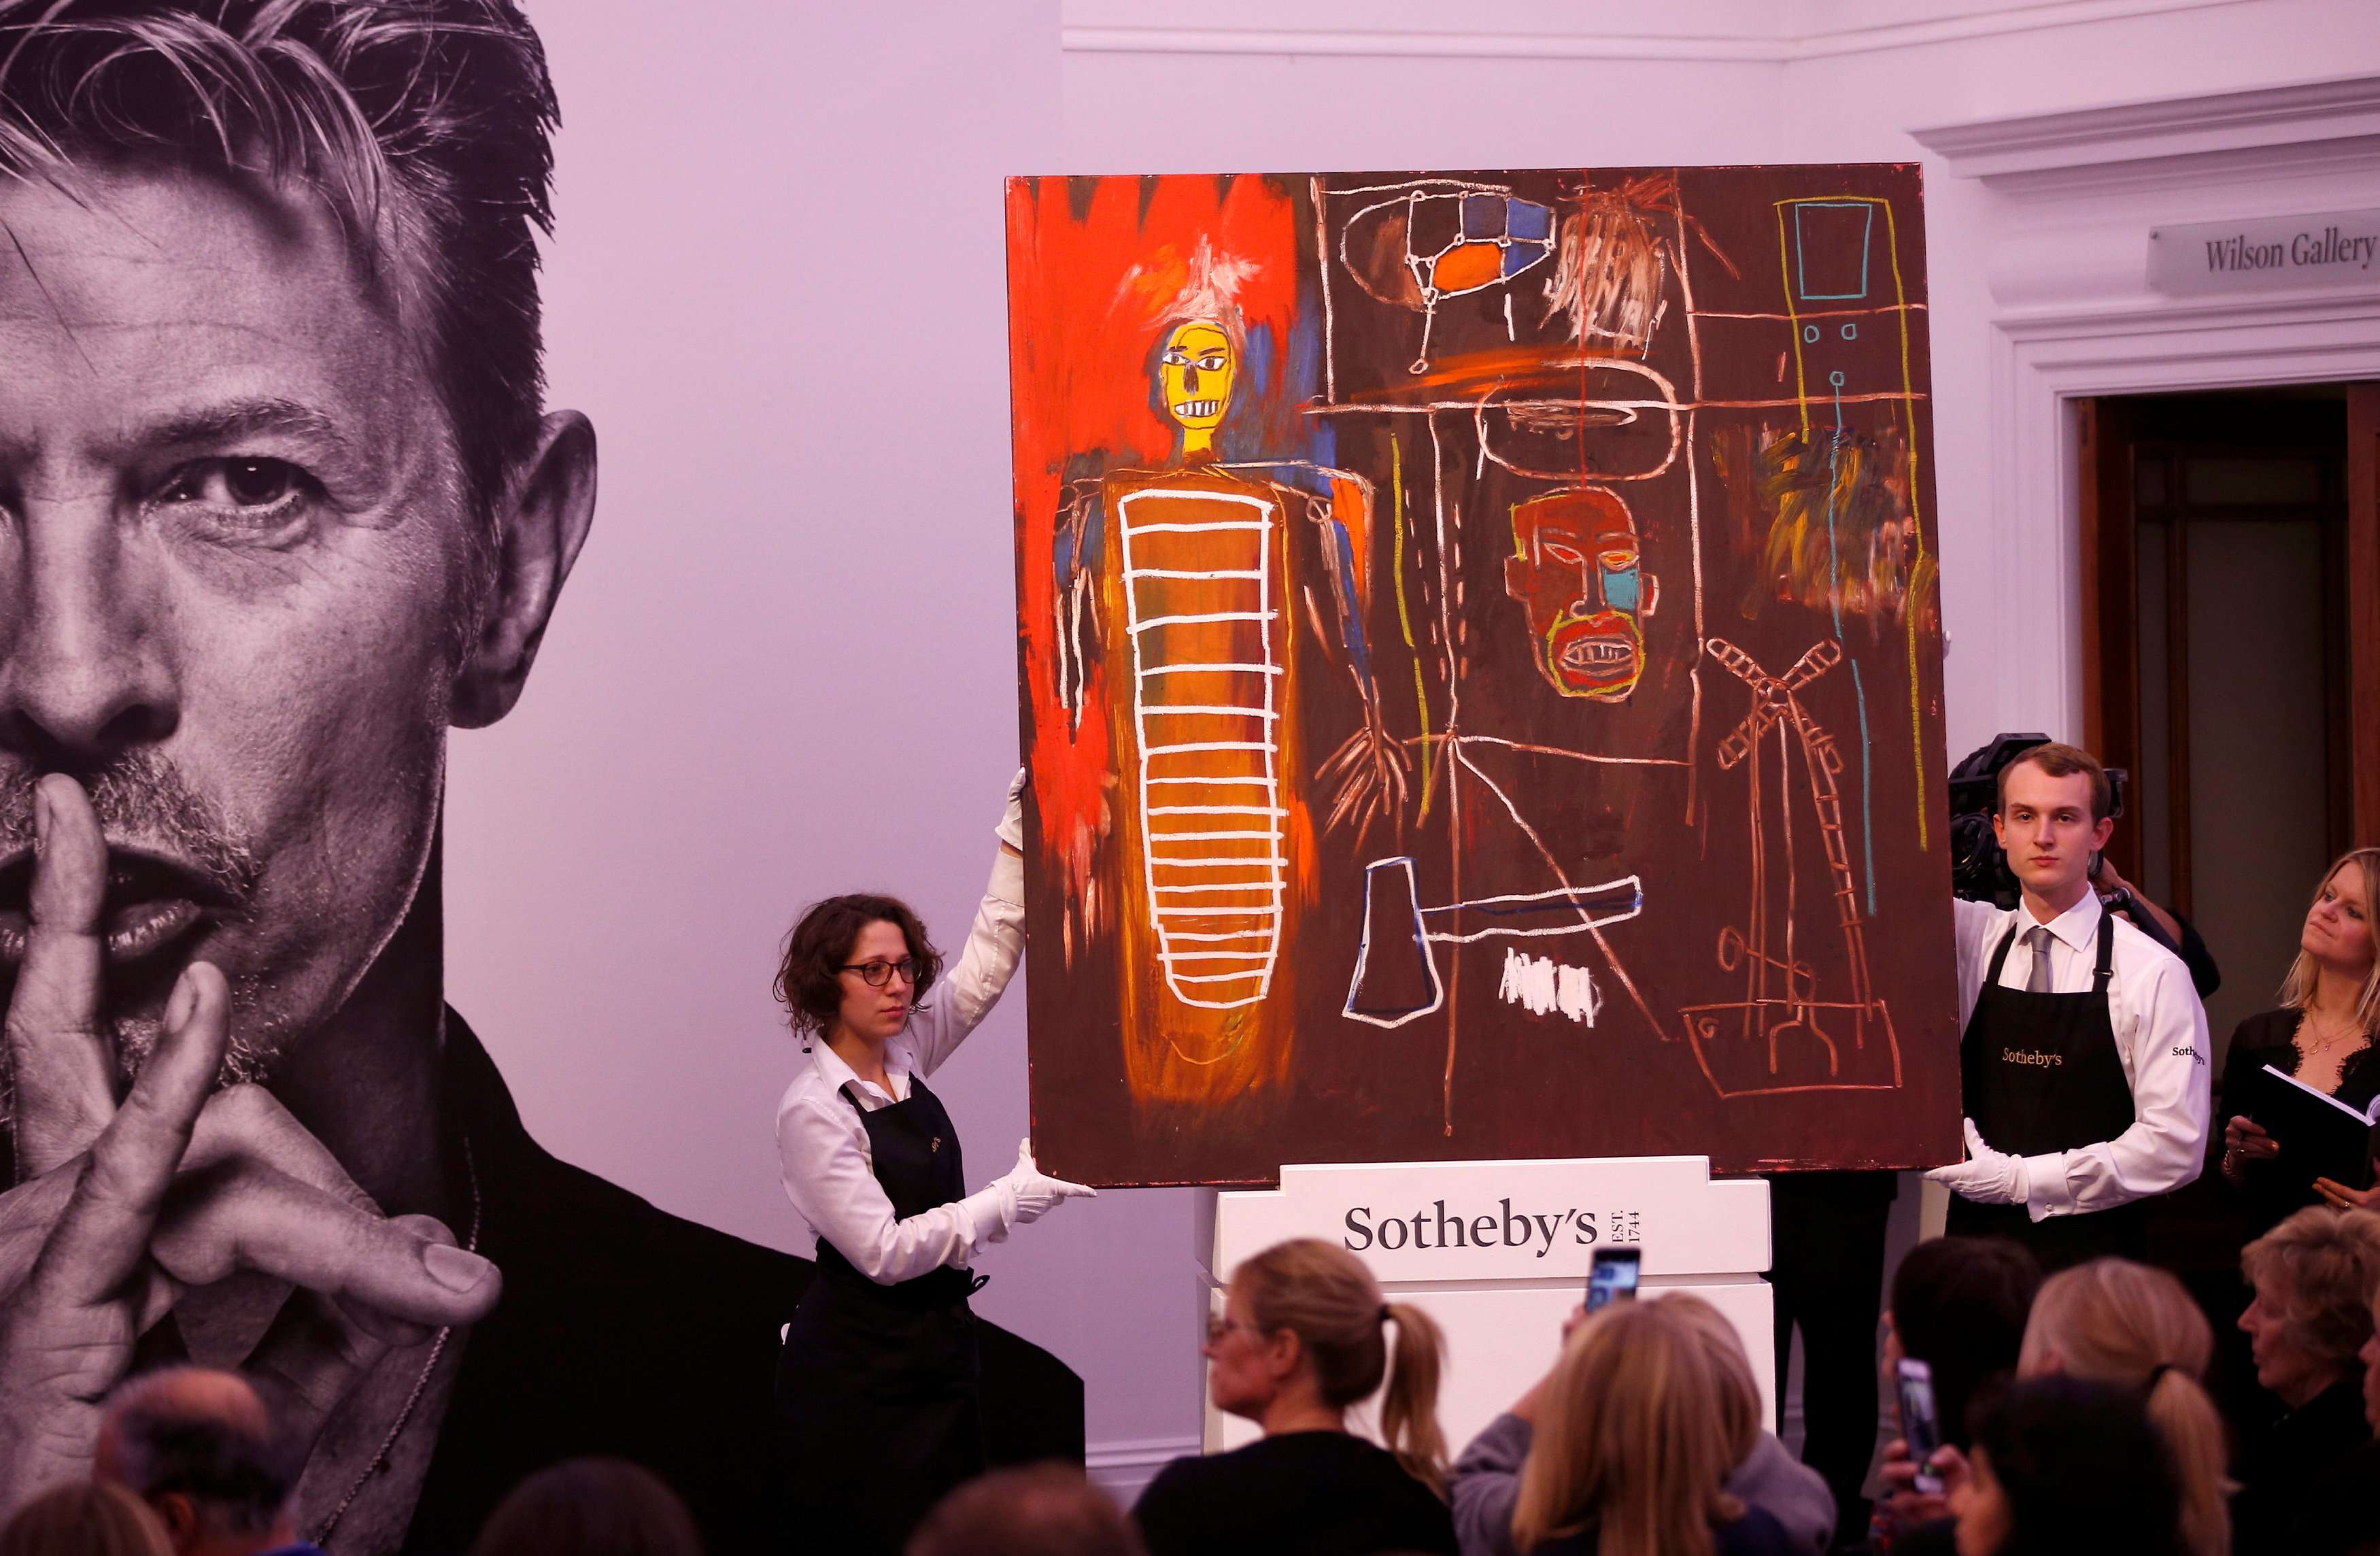 The highest-selling item in Bowie’s collection, the graffiti-inspired Air Power canvas by Basquiat, sold for £7.09 million Photo: Reuters